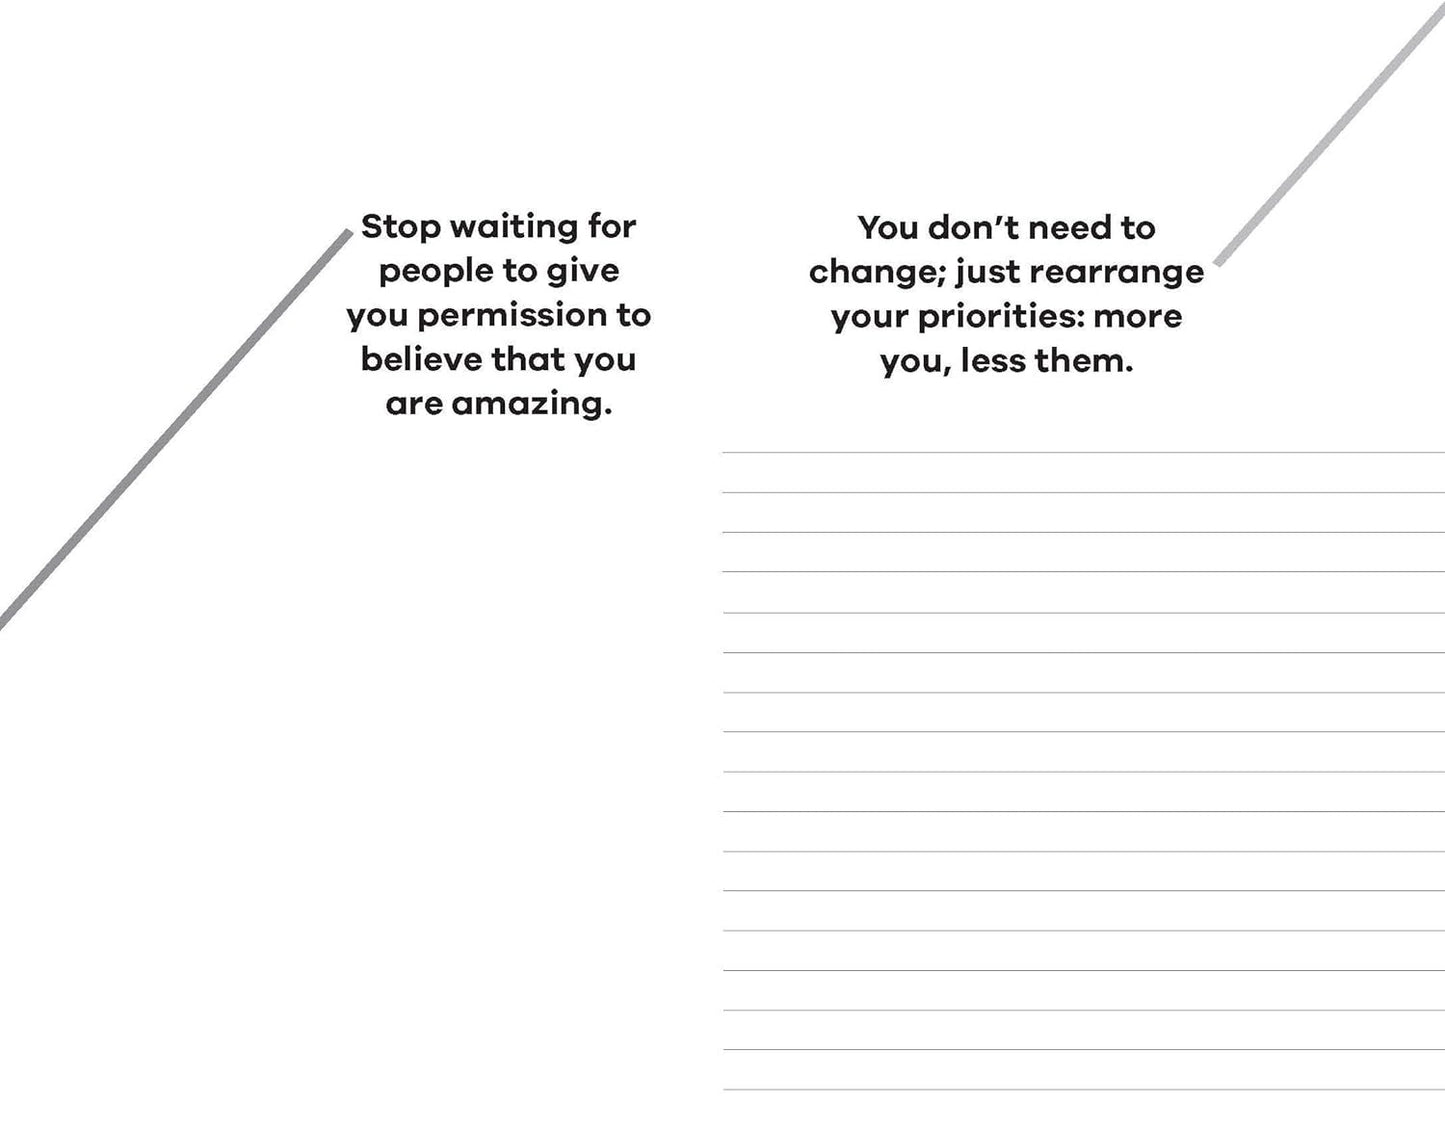 Image divided diagonally with text on each half; left side text says "stop waiting for people to give you permission to believe that you are amazing." right side says "your priorities need to change;
Product Name: What a Time to Journal: Work Out Why You Are Already Enough
Brand Name: by Chidera Eggerue (Author)